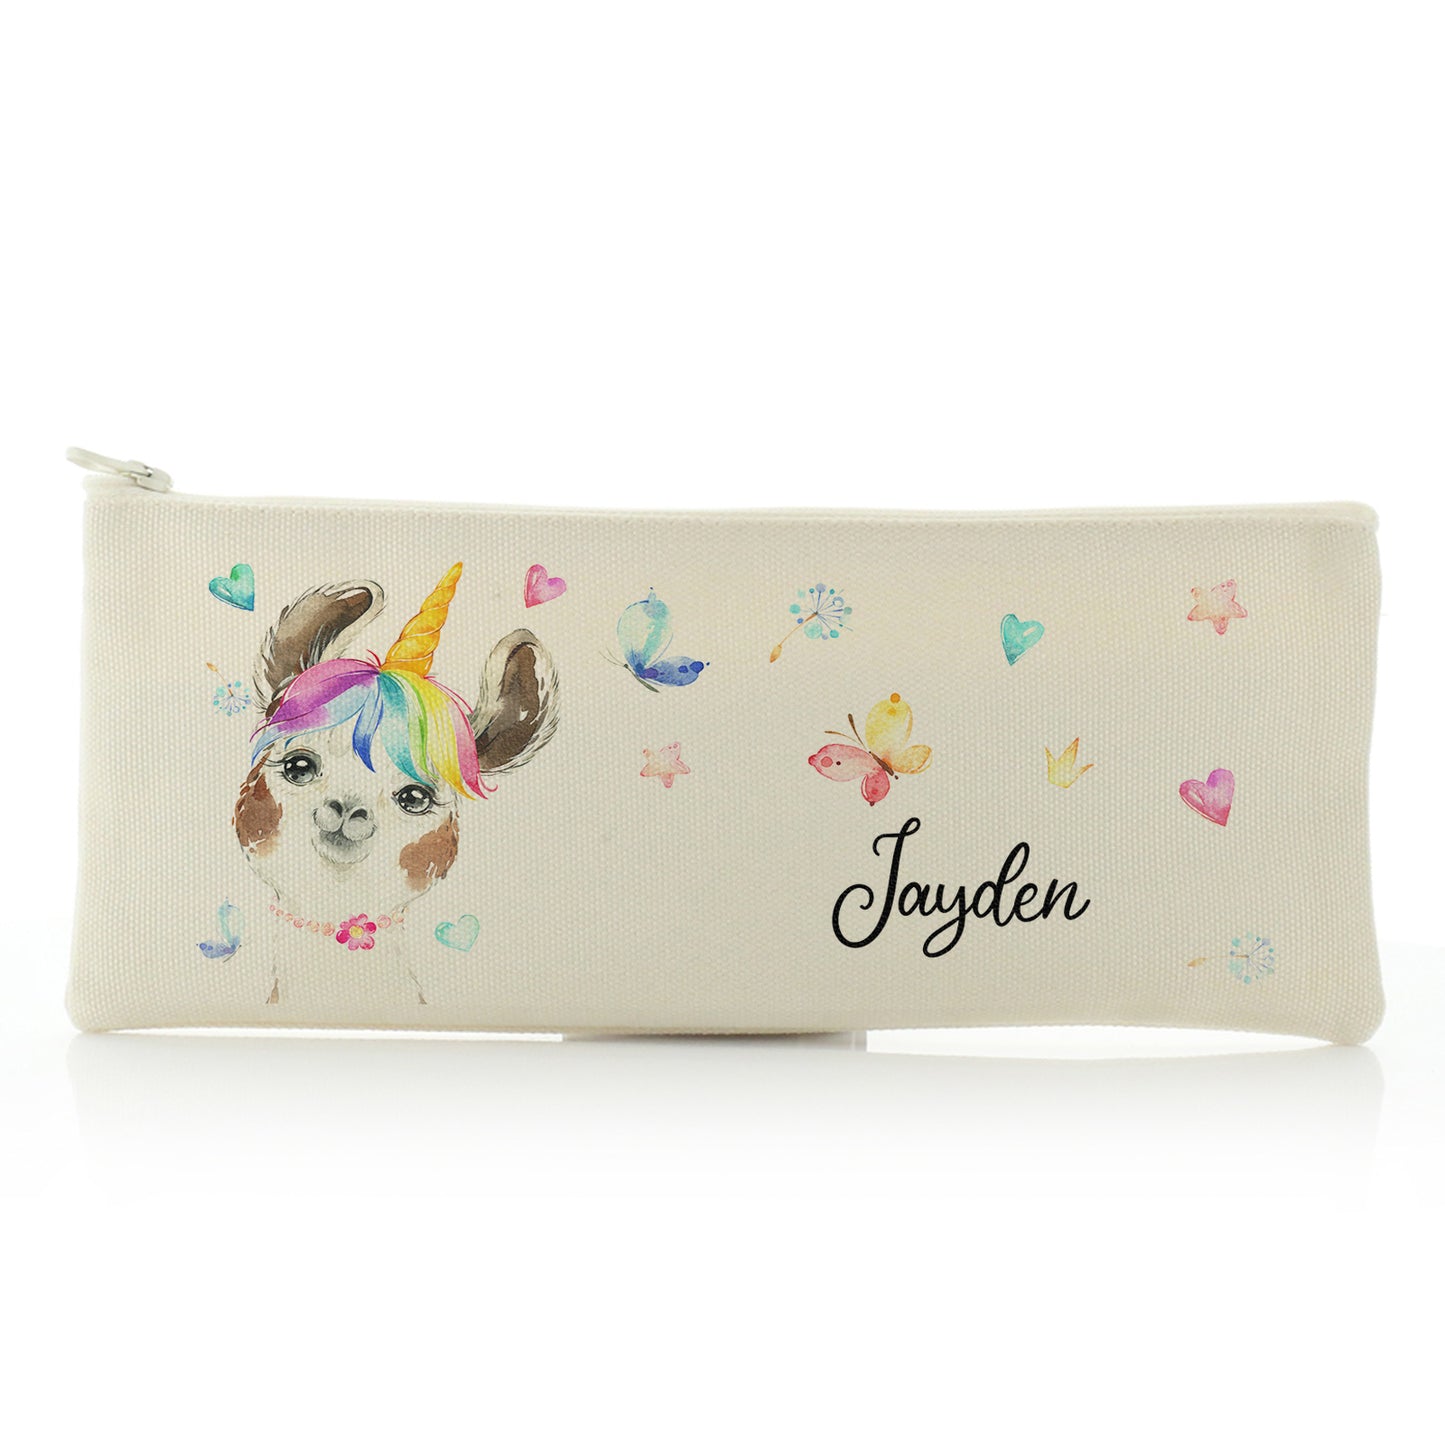 Personalised Canvas Zip Bag with Alpaca Unicorn with Rainbow Hair Hearts Stars and Cute Text